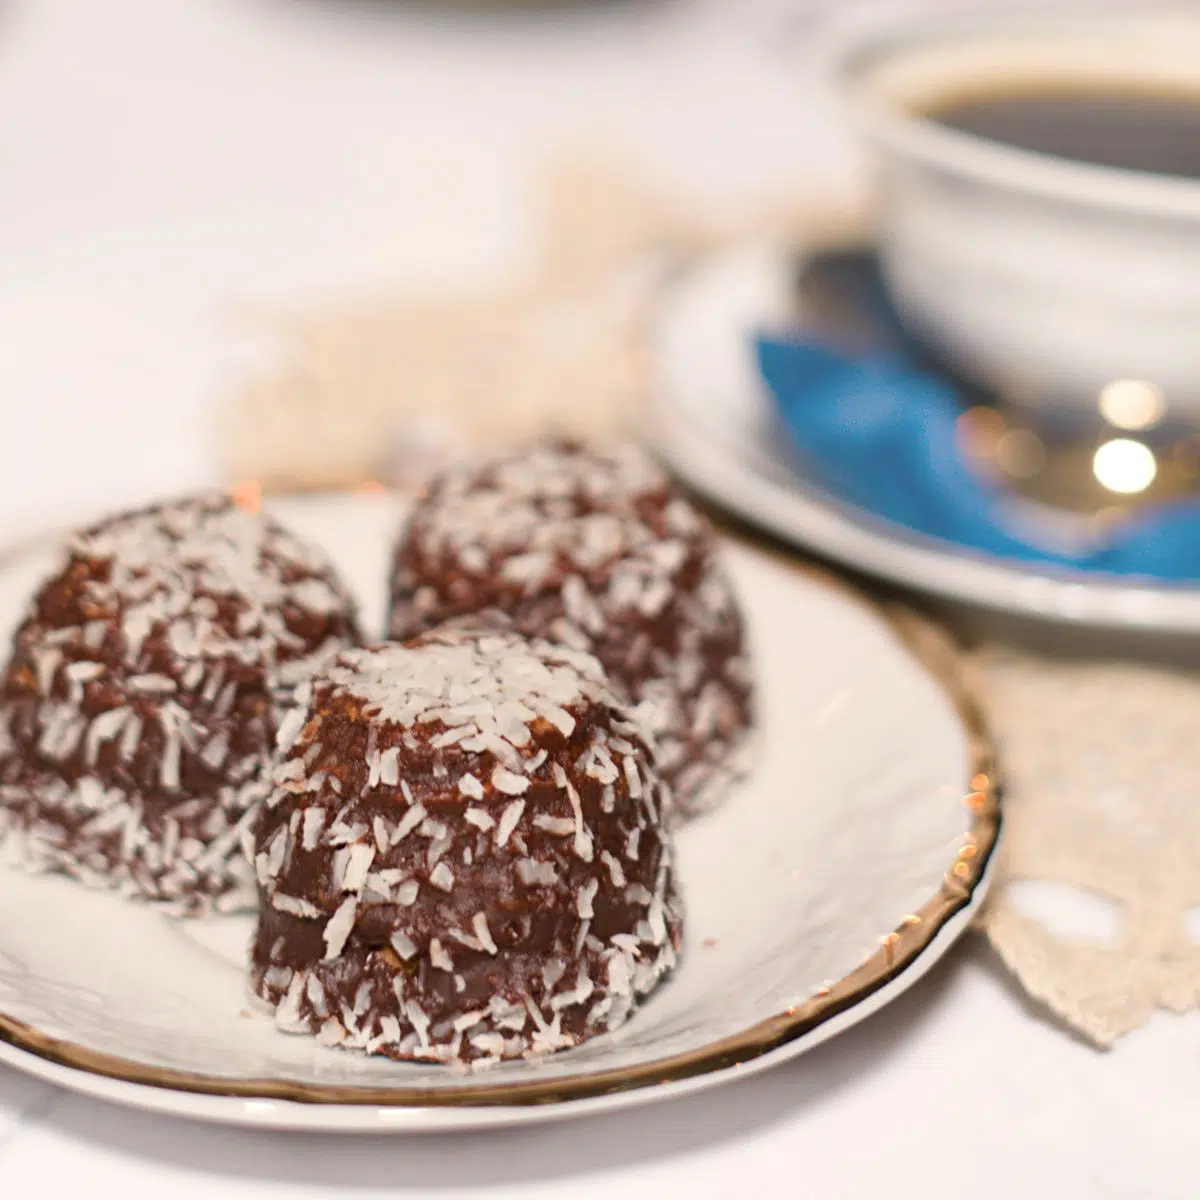 3 chocolate balls on platter with coffee.